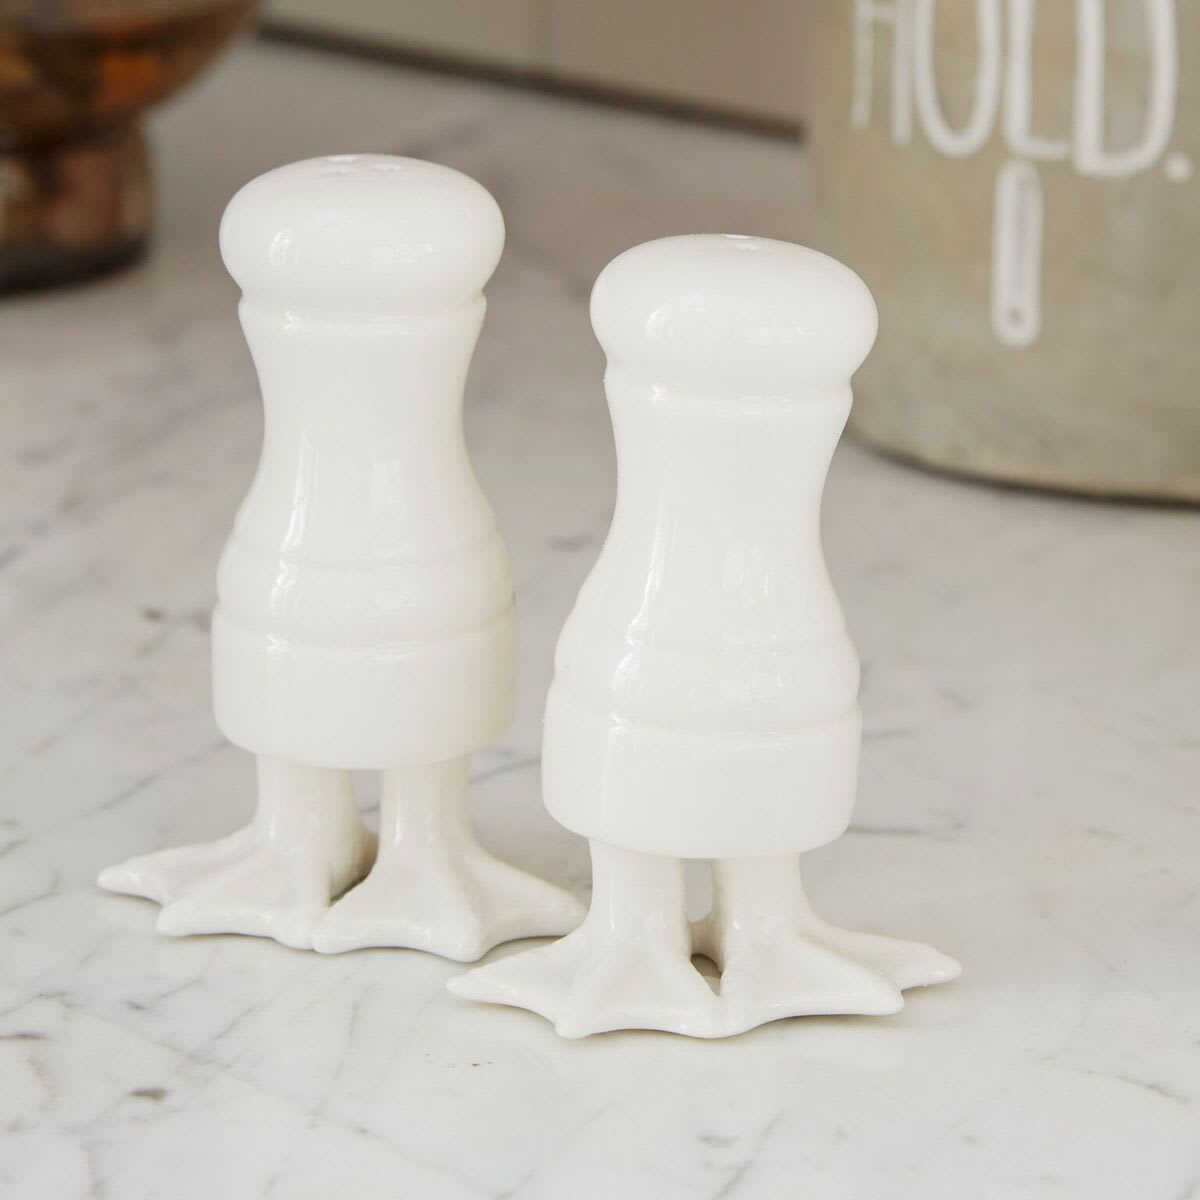 16 salt and pepper shakers that make good housewarming gifts